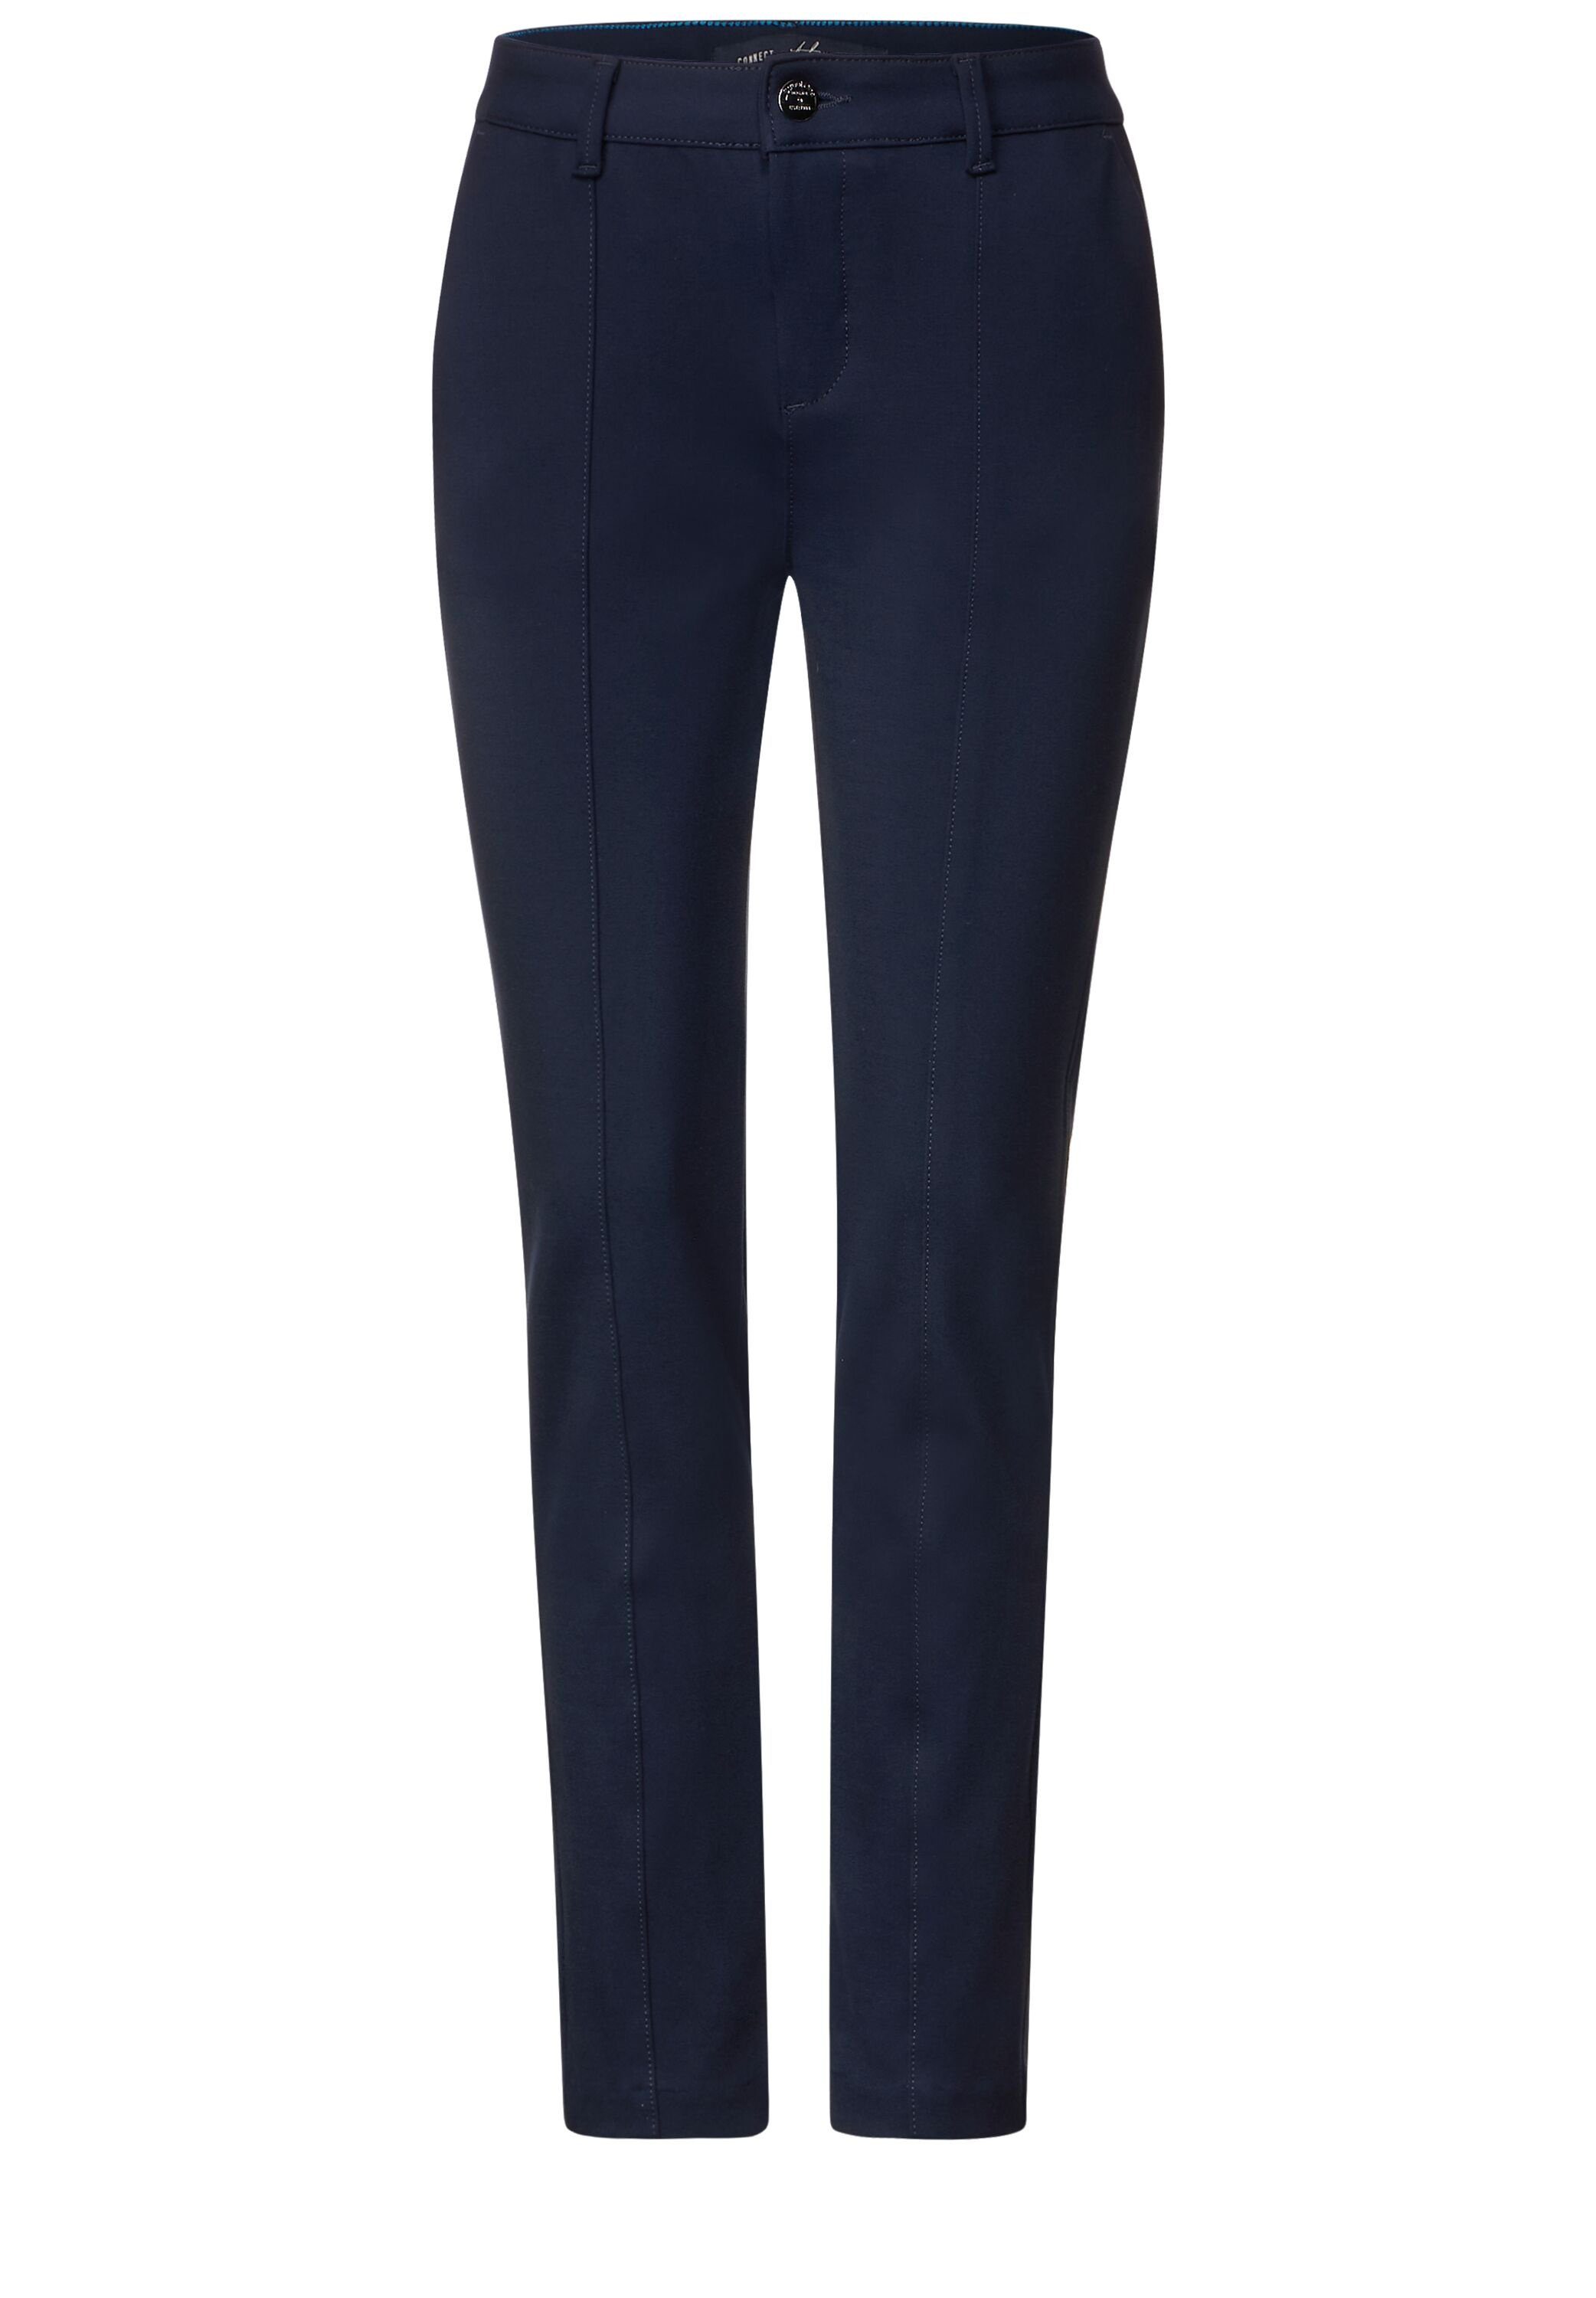 STREET Casual ONE deep Chinos blue Chinohose Fit